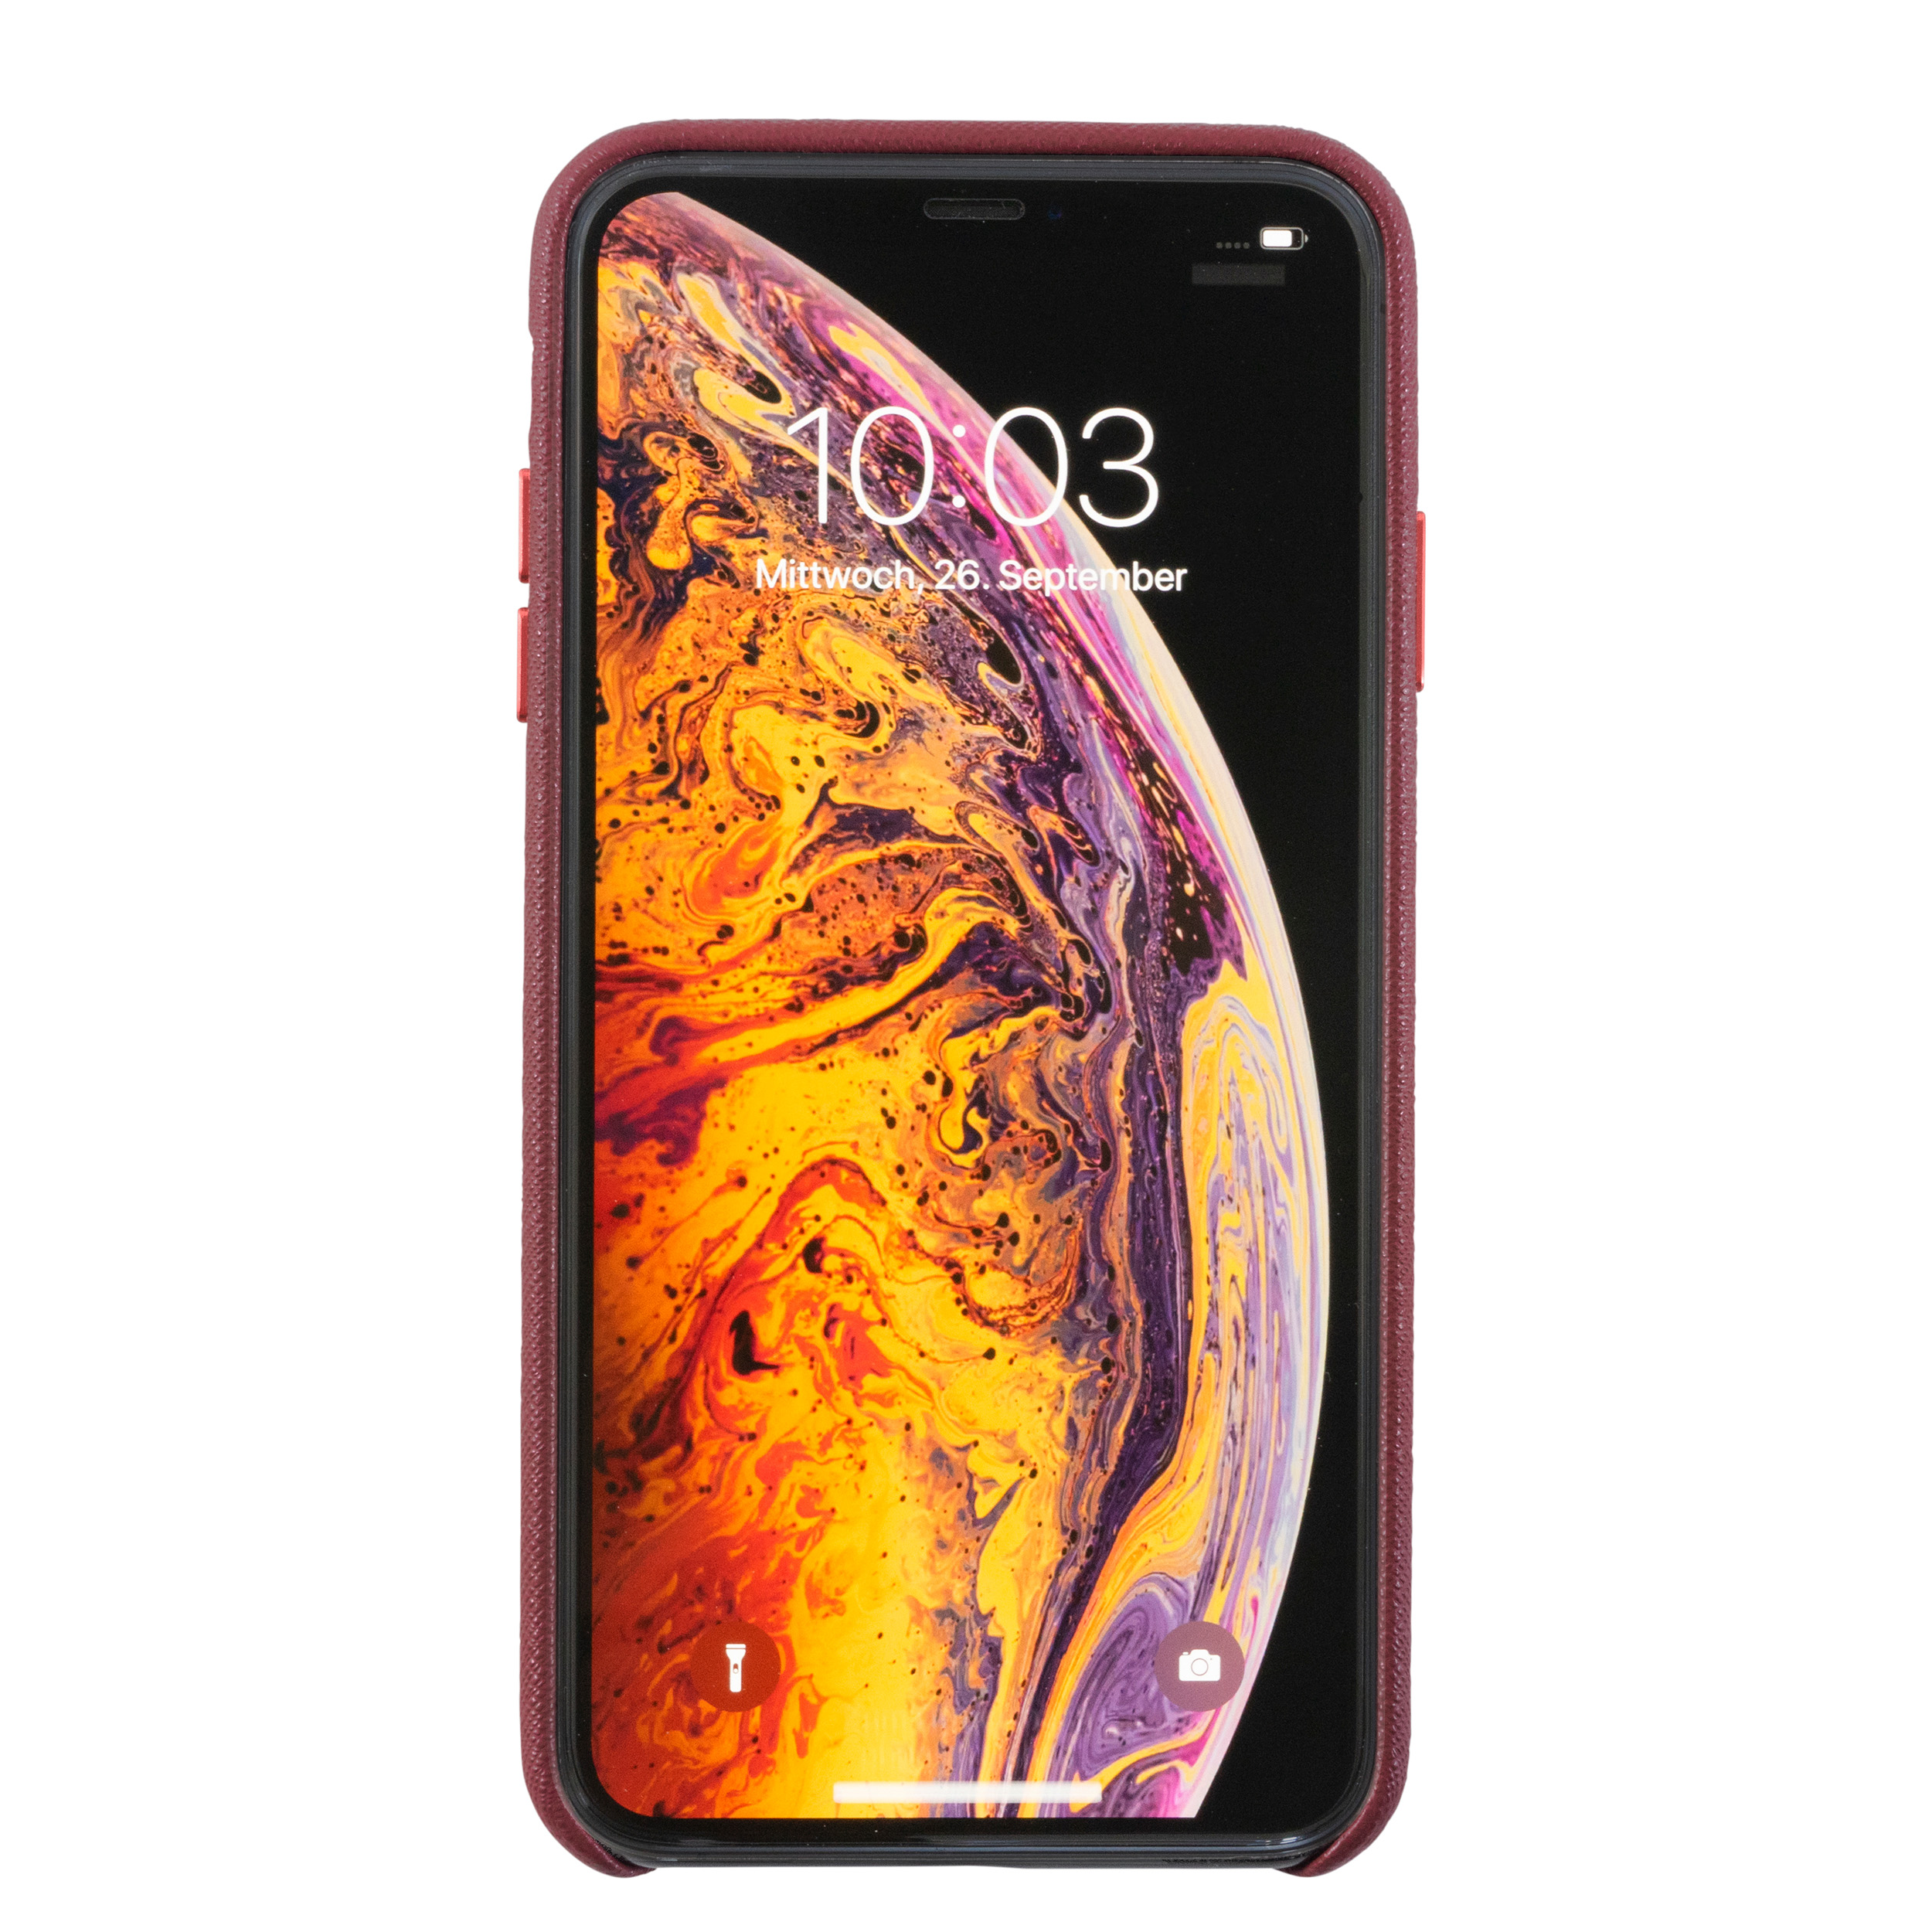 XS, IPhone KMP Pear Red, Schutzhülle Leder X, red Backcover, iPhone XS, Apple, X pear Vegane für